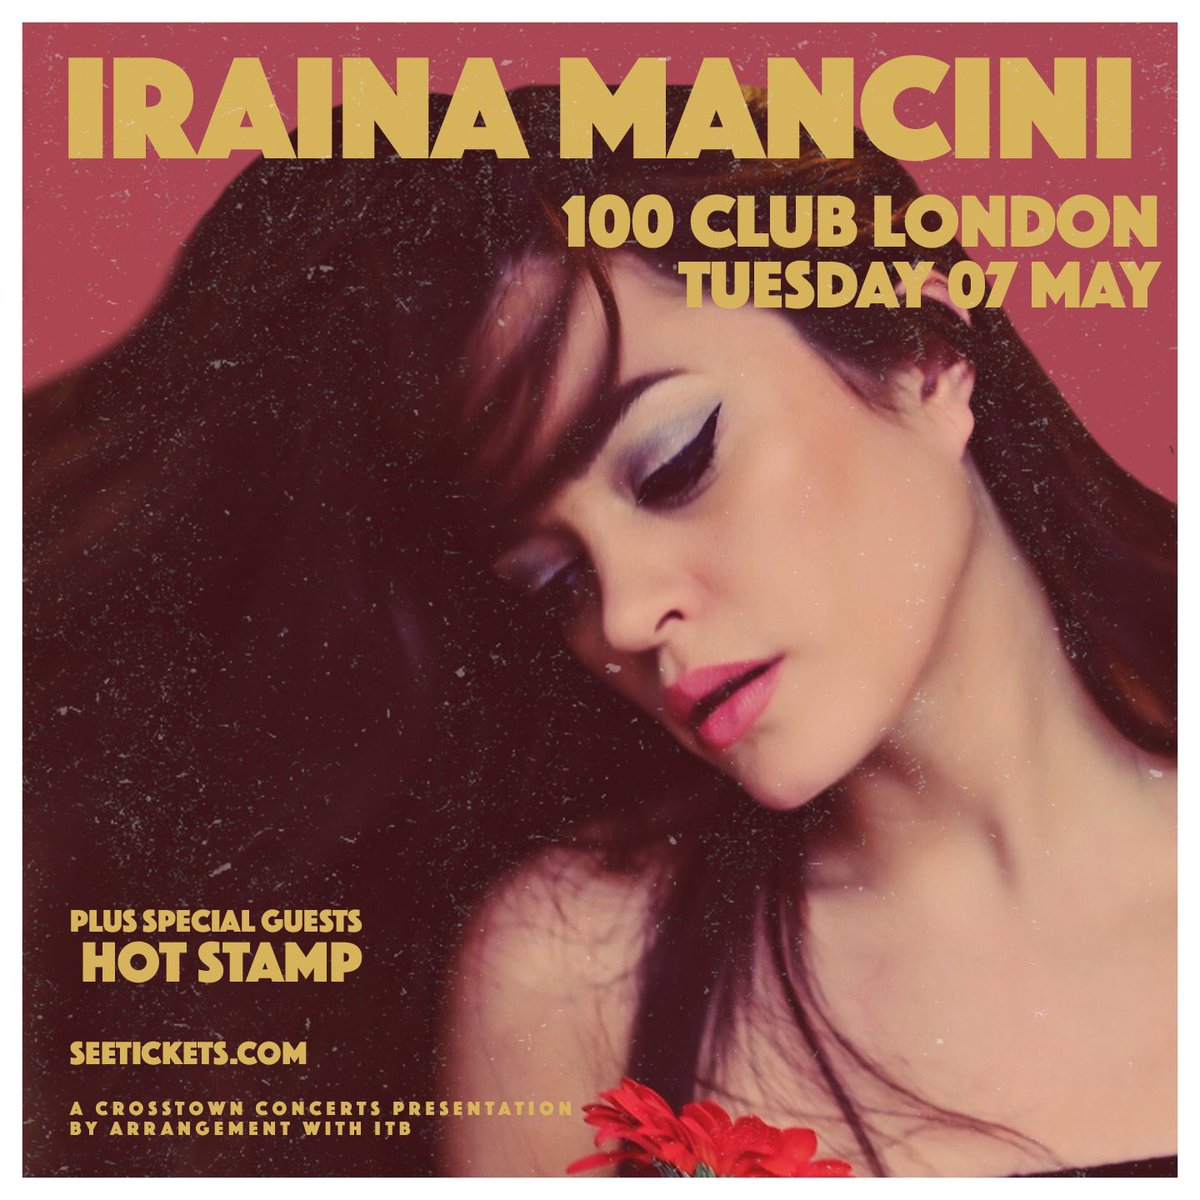 Special guests Hot Stamp join @IrainaMancini at @100clubLondon this May. Tickets are on sale here: crosstownconcerts.seetickets.com/event/iraina-m…